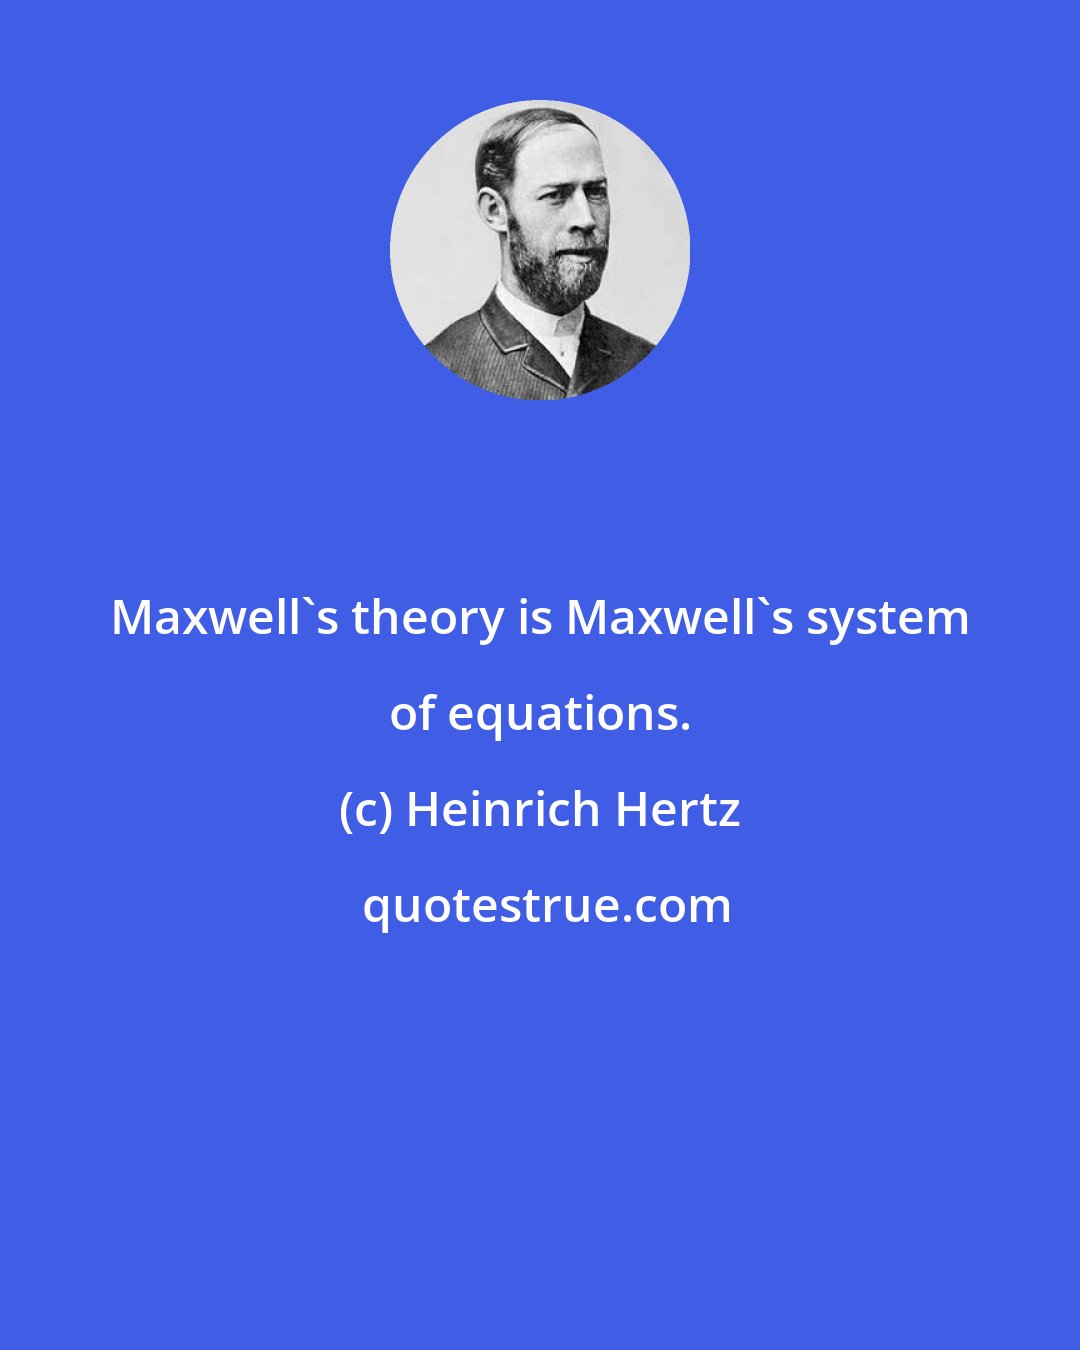 Heinrich Hertz: Maxwell's theory is Maxwell's system of equations.